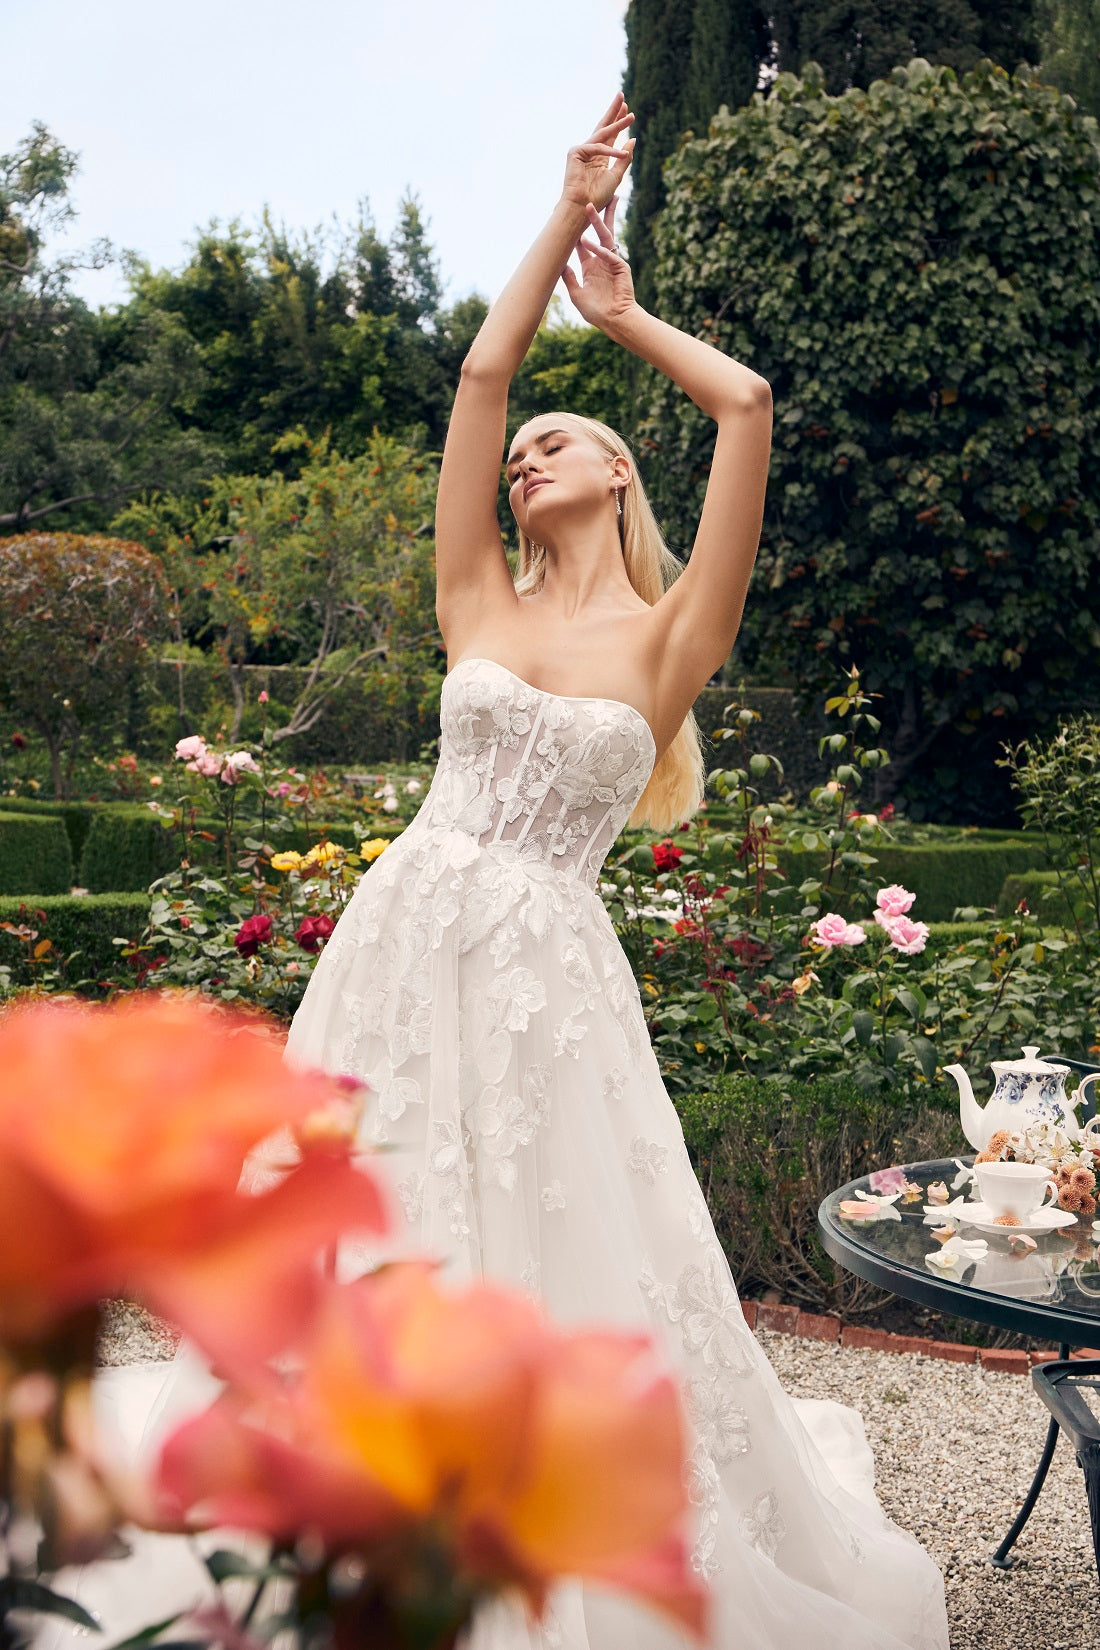 Casablanca Bridal 2540 Elloise A-Line Ballgown Strapless Sheer Floral Corset Sweetheart Neckline Open Back Train Wedding Gown. Prepare to be swept away by the ethereal beauty of Style 2540 Elloise, our exquisite A-line wedding dress.